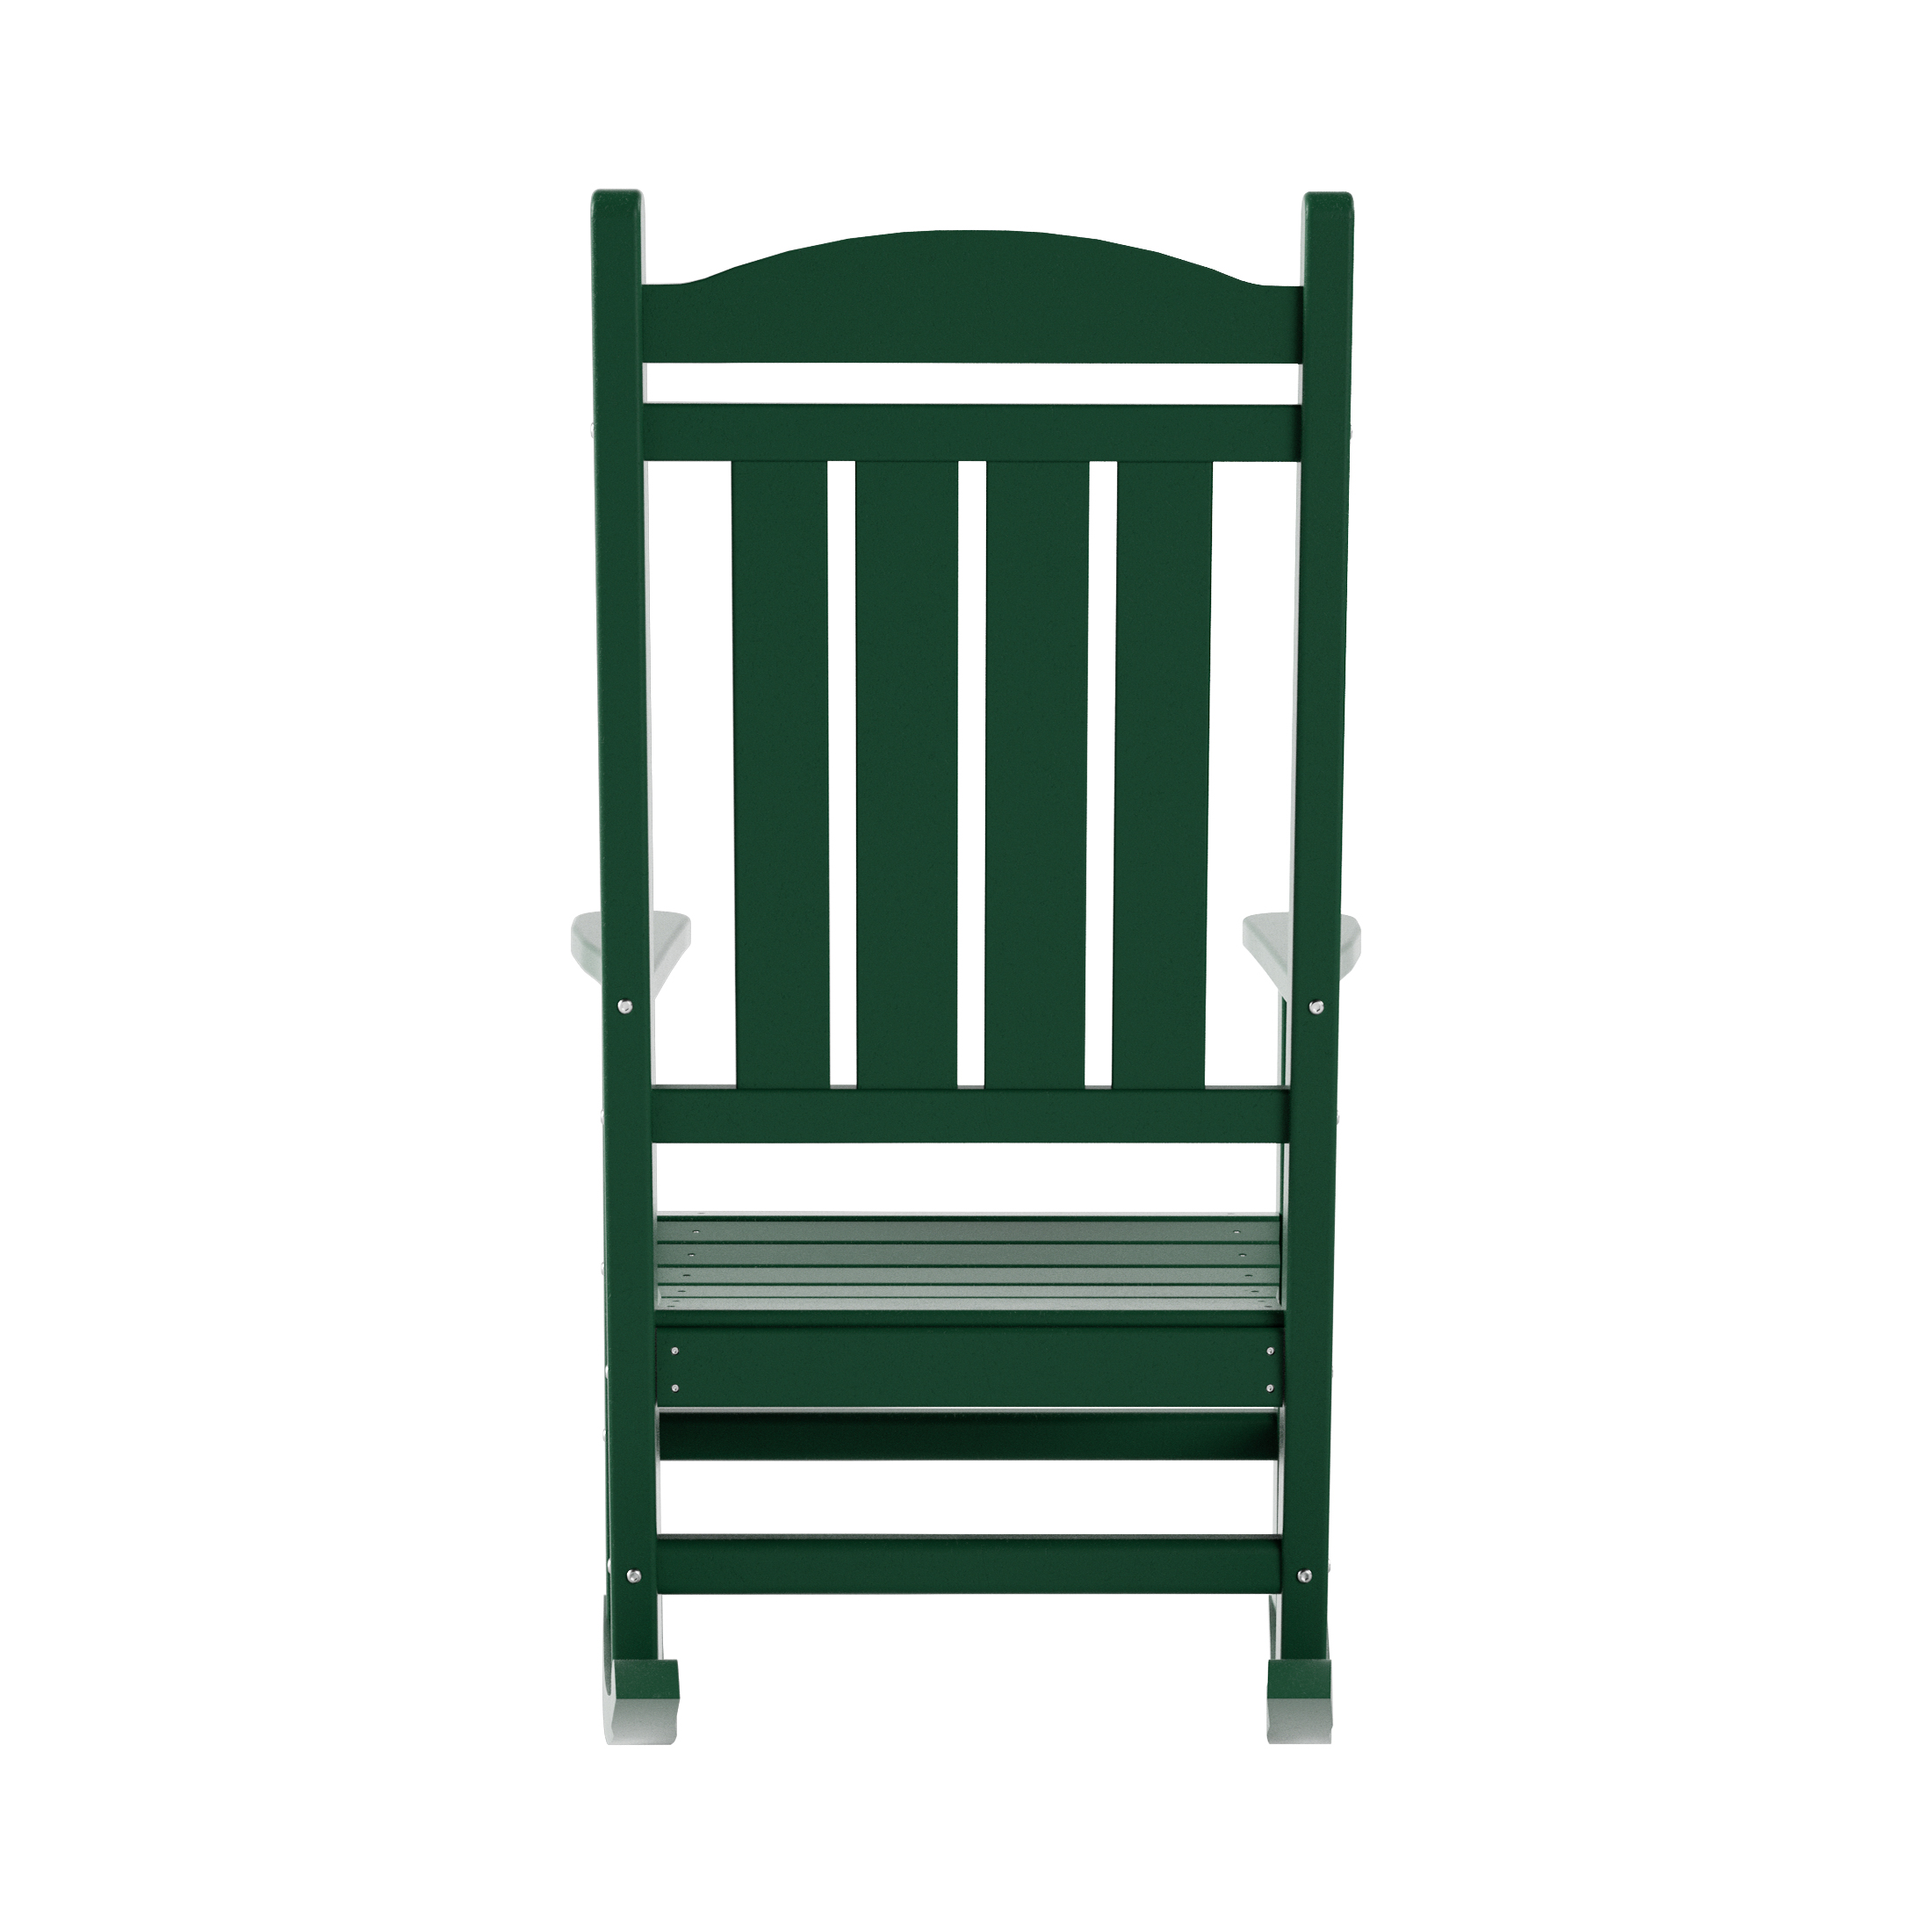 Costaelm Paradise Classic Plastic Porch Rocking Chair, Dark Green - image 5 of 9